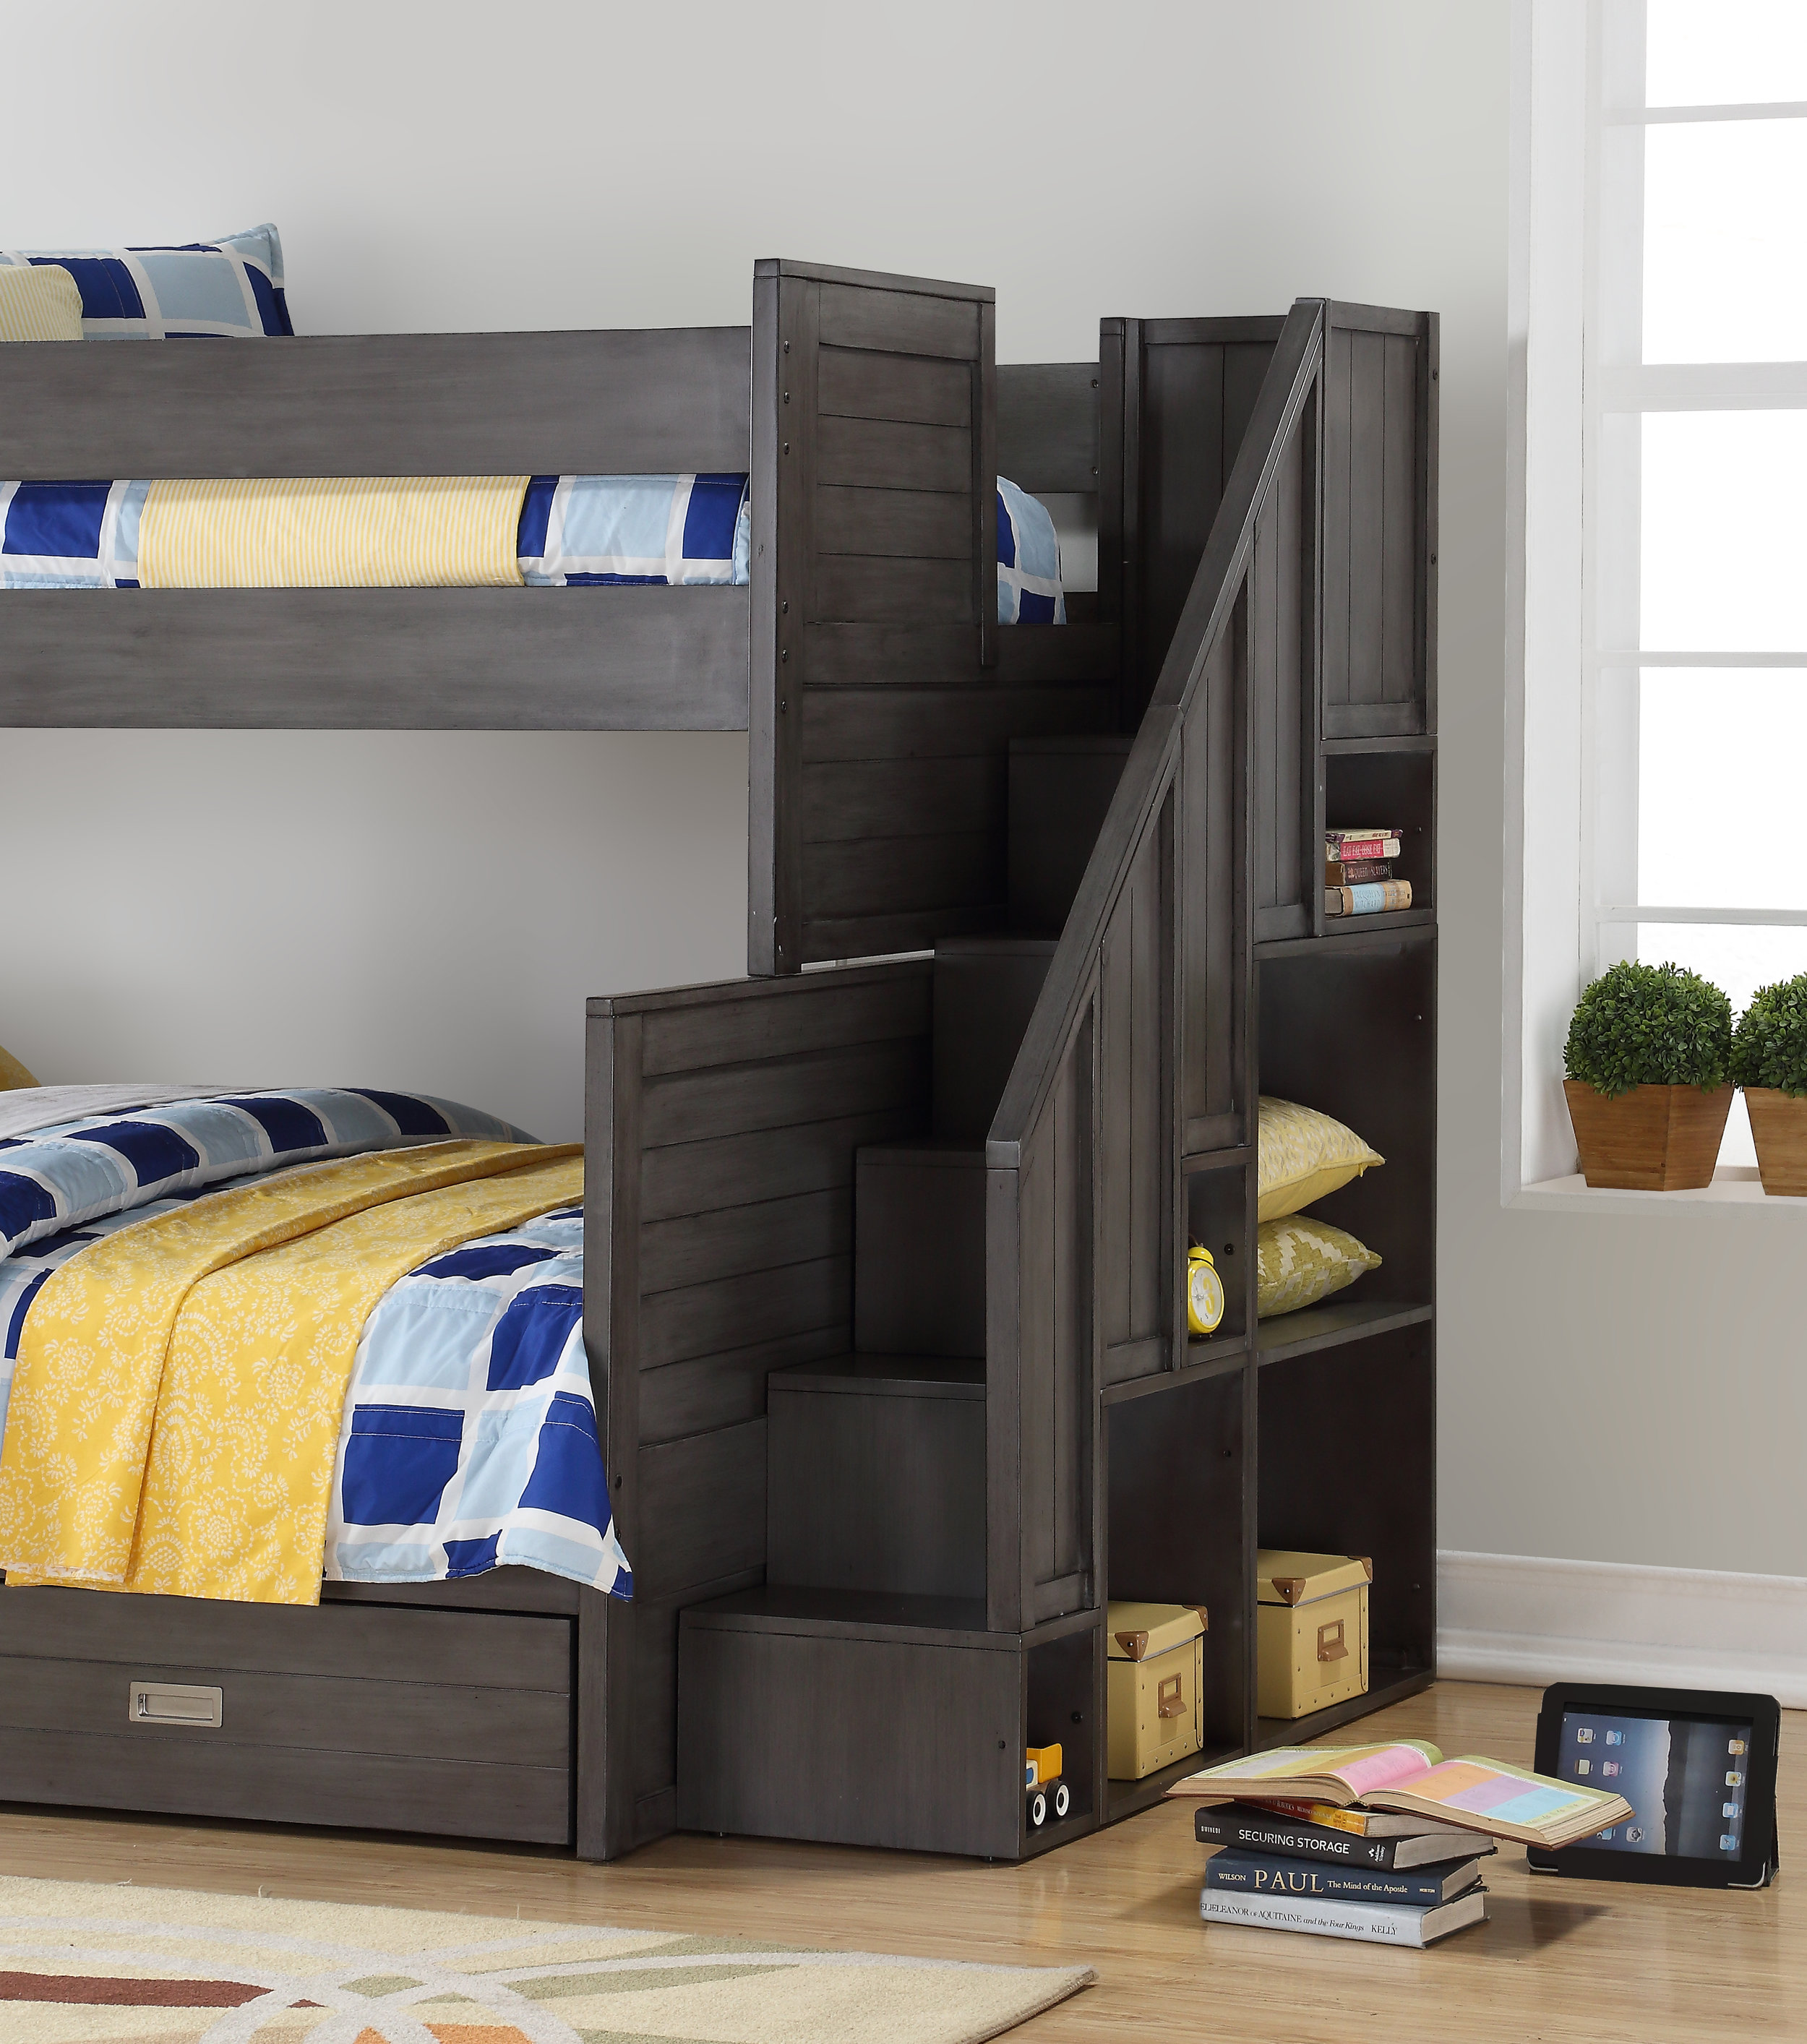 Caramia Furniture Bunk Beds, Ryan Twin Over Double Bunk Bed With Universal Staircase